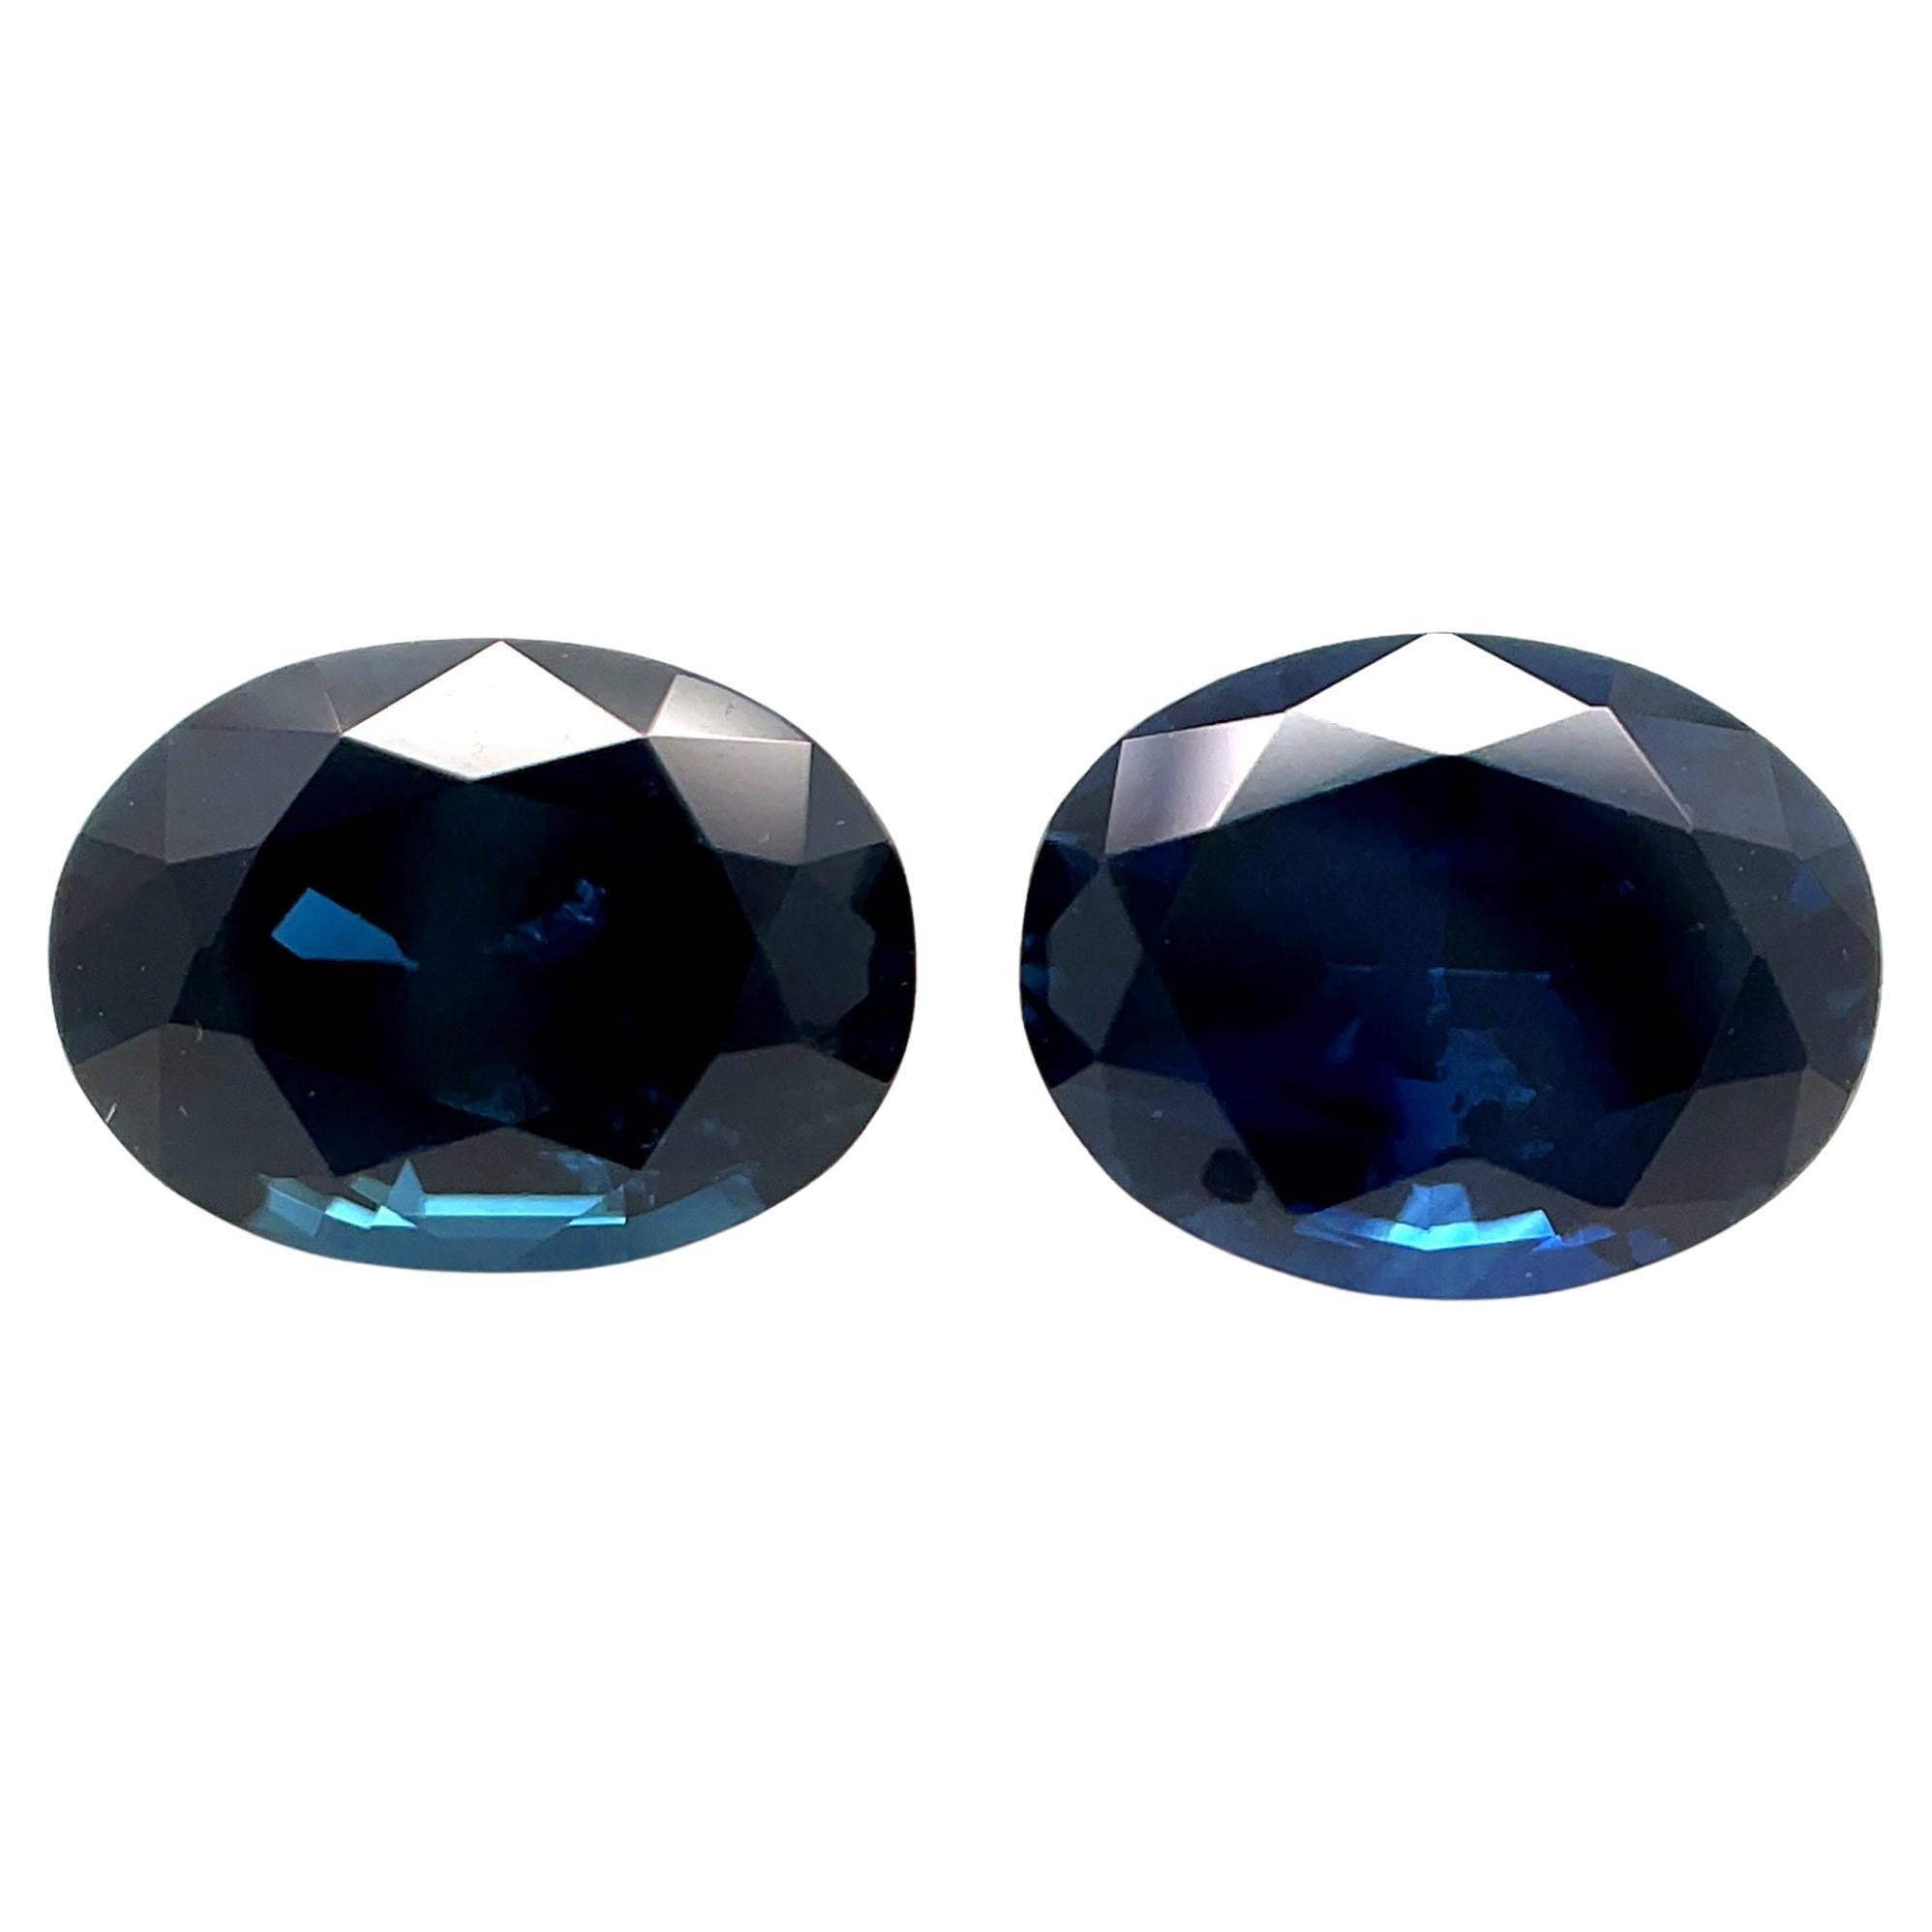  Royal Blue Sapphire Pair, 3.82 Carats Total, Loose Gemstones for Earrings For Sale